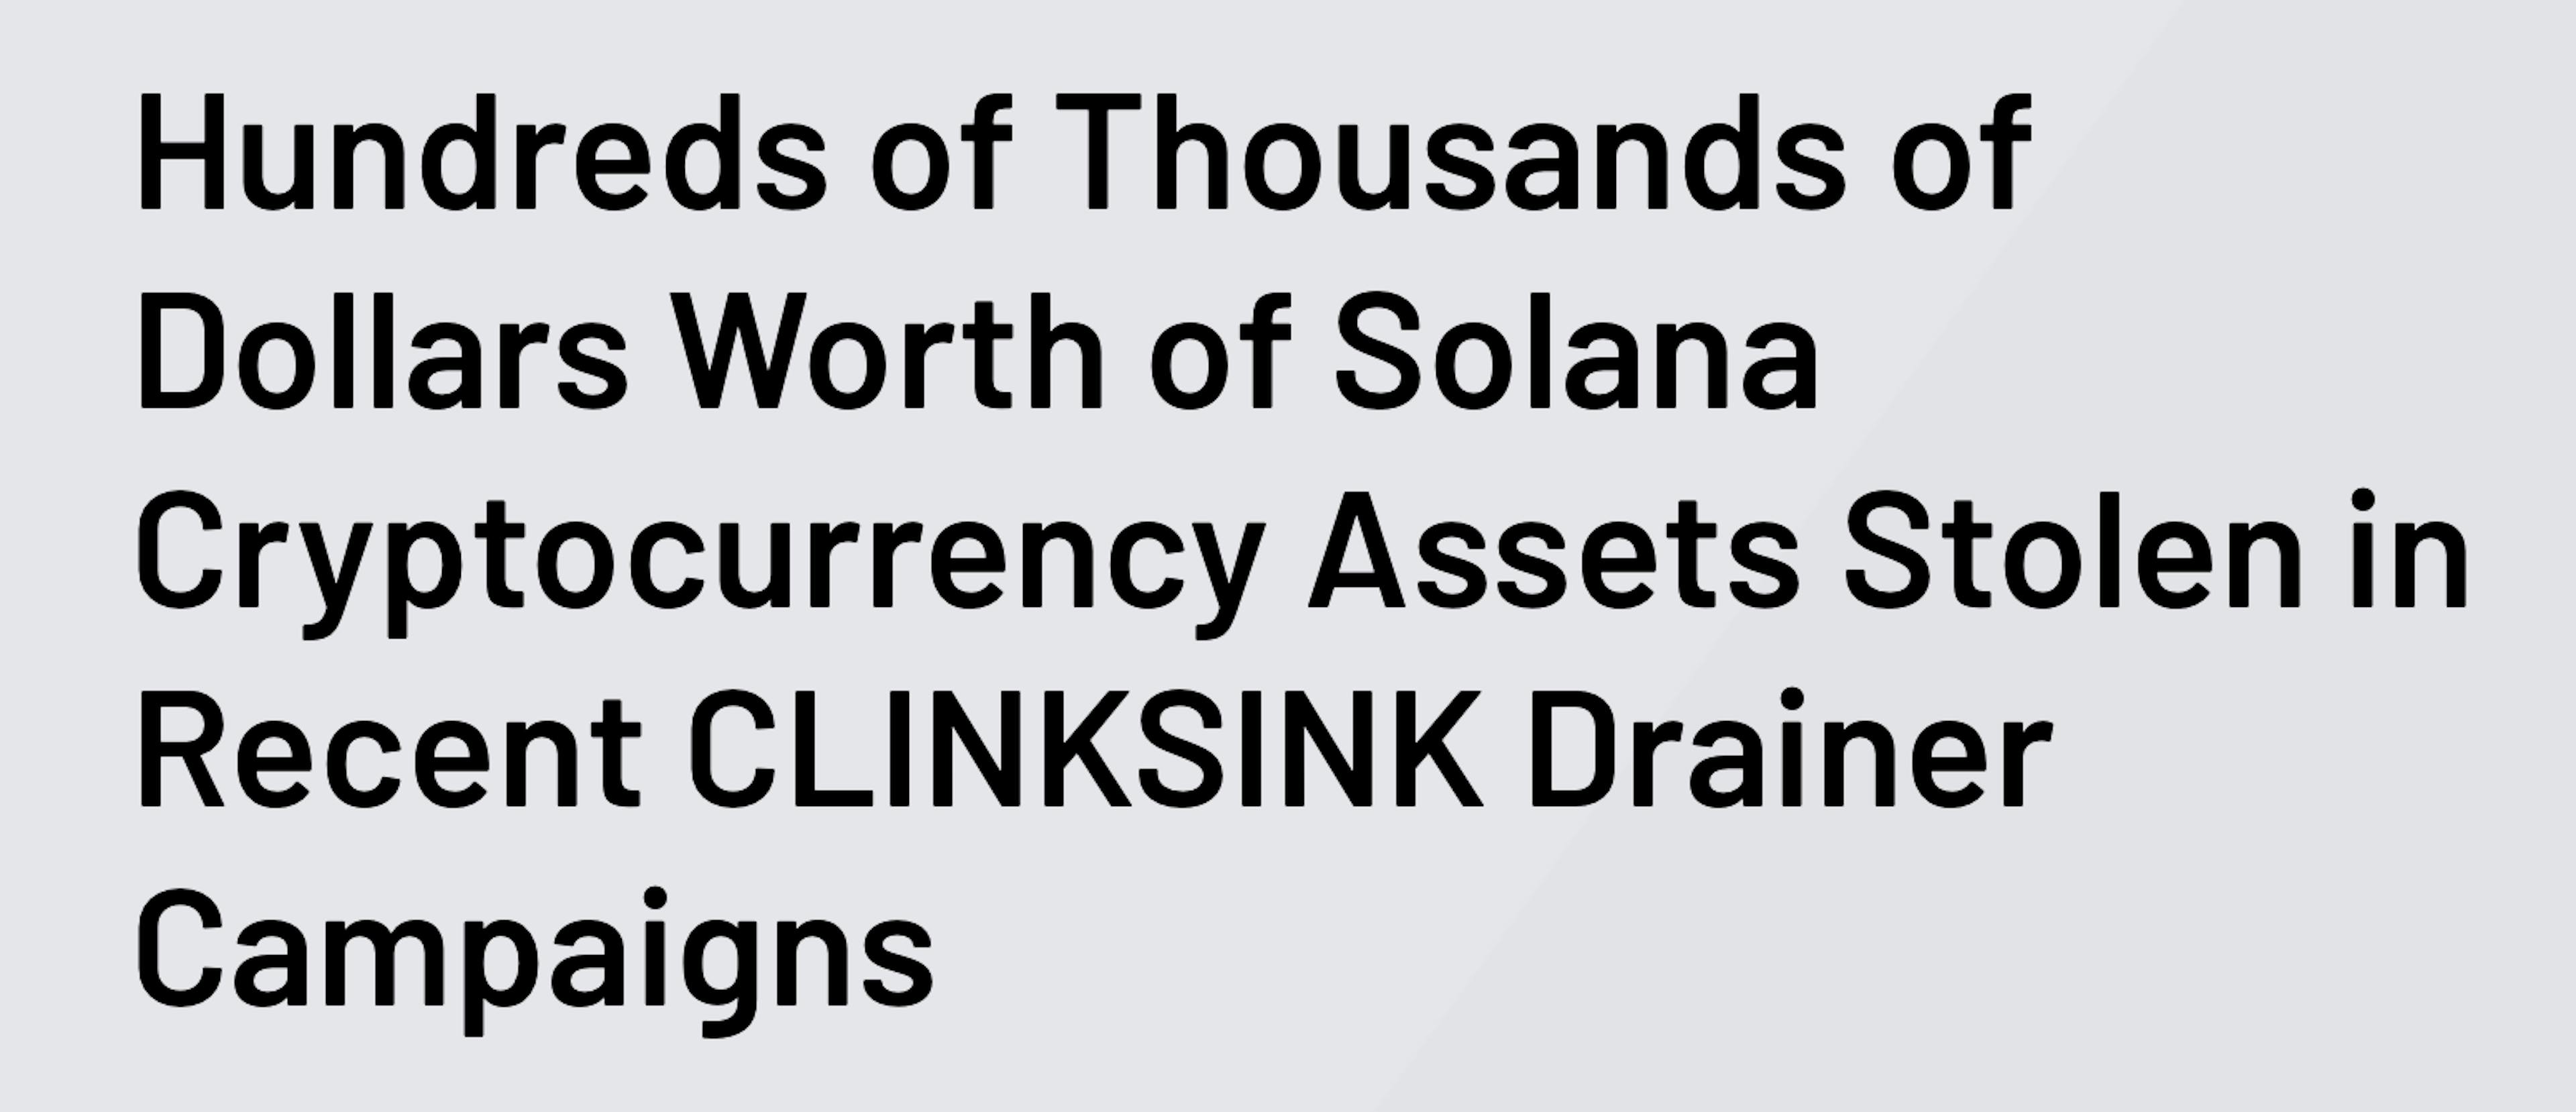 https://www.mandiant.com/resources/blog/solana-cryptocurrency-stolen-clinksink-drainer-campaigns